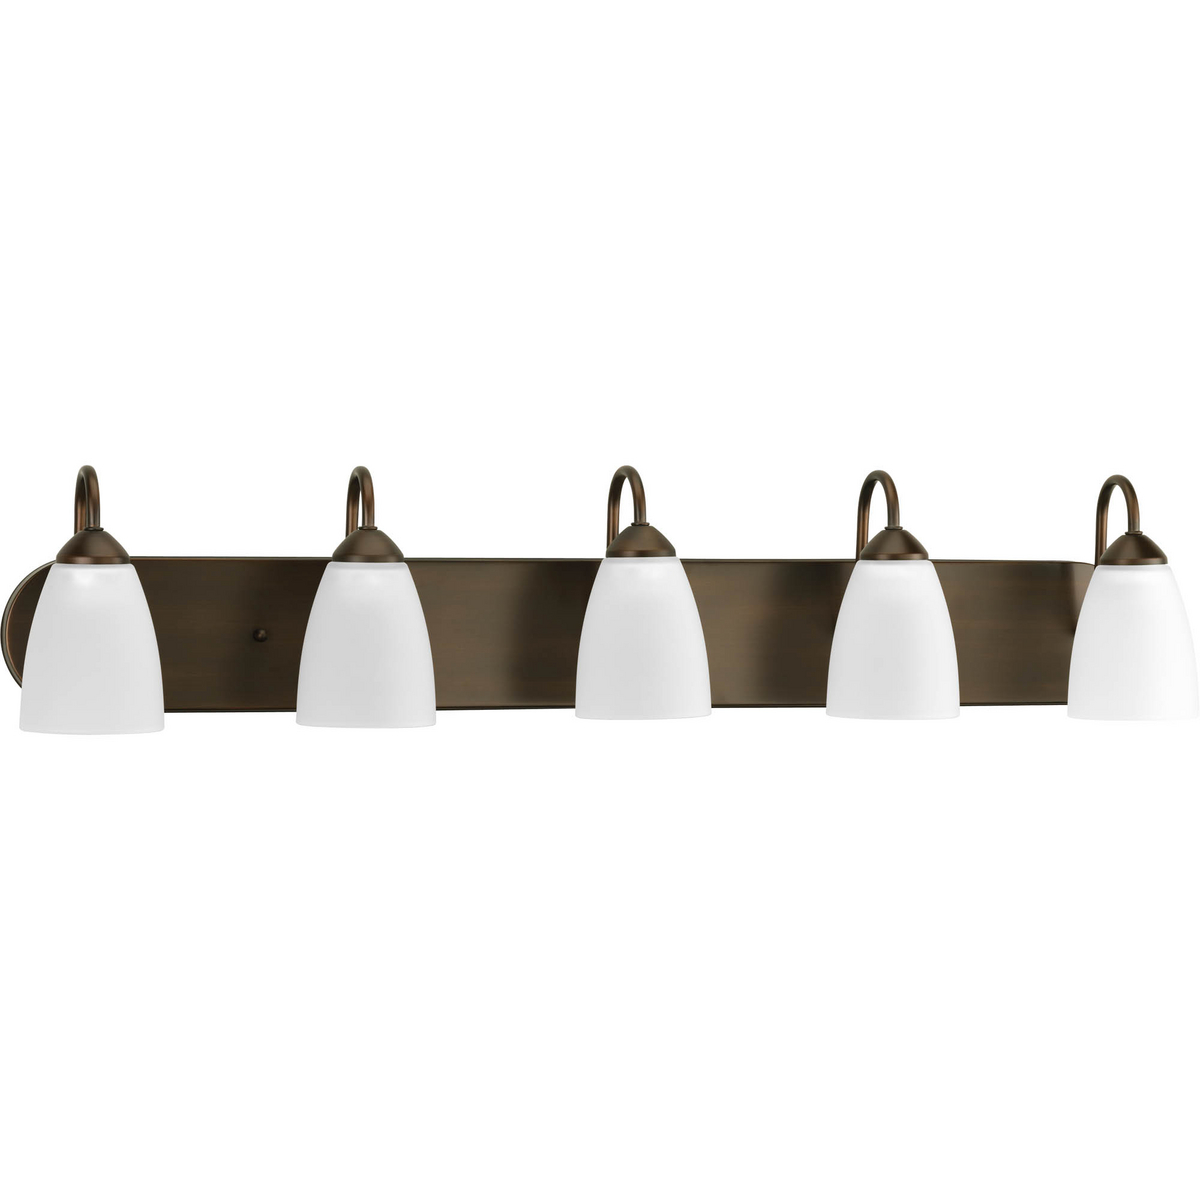 Gather possesses a smart simplicity to complement today's home. This five-light bath bracket contains etched glass shades which add distinction and provide pleasing illumination to your room. Featuring a beautiful Antique Bronze finished frame, this collection allows you to decorate an entire home with confidence and style.